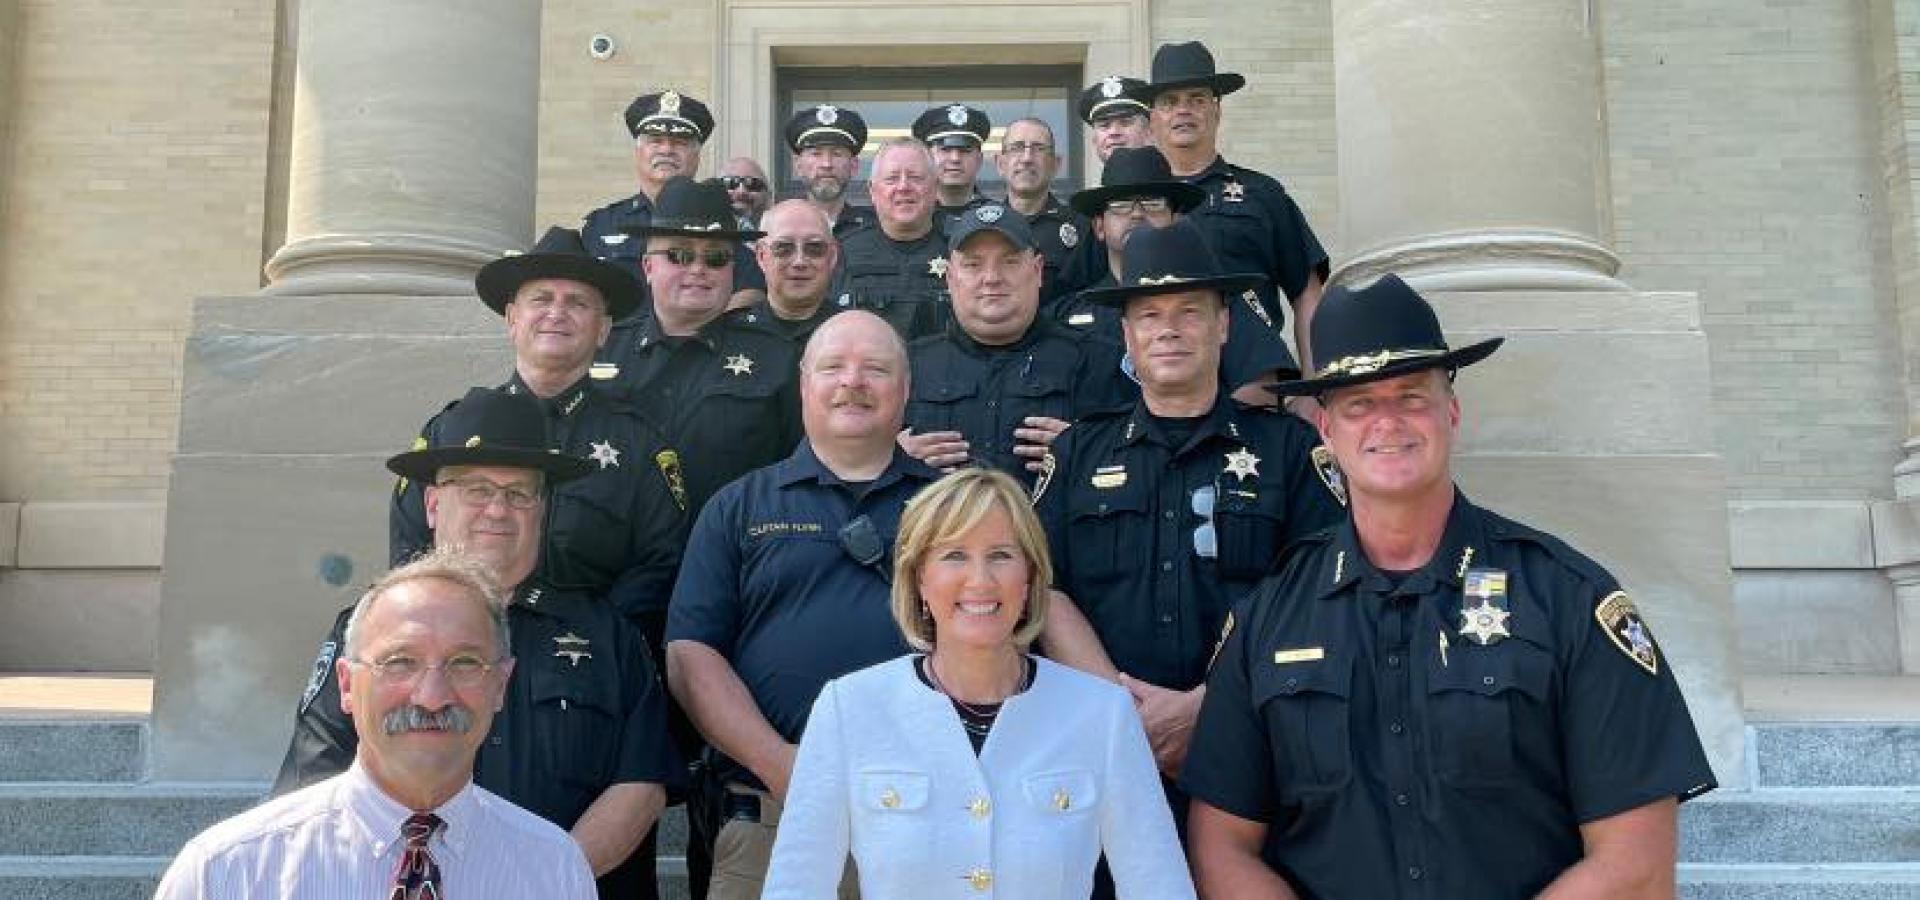 Tenney Poses for Photo with Law Enforcement Officers